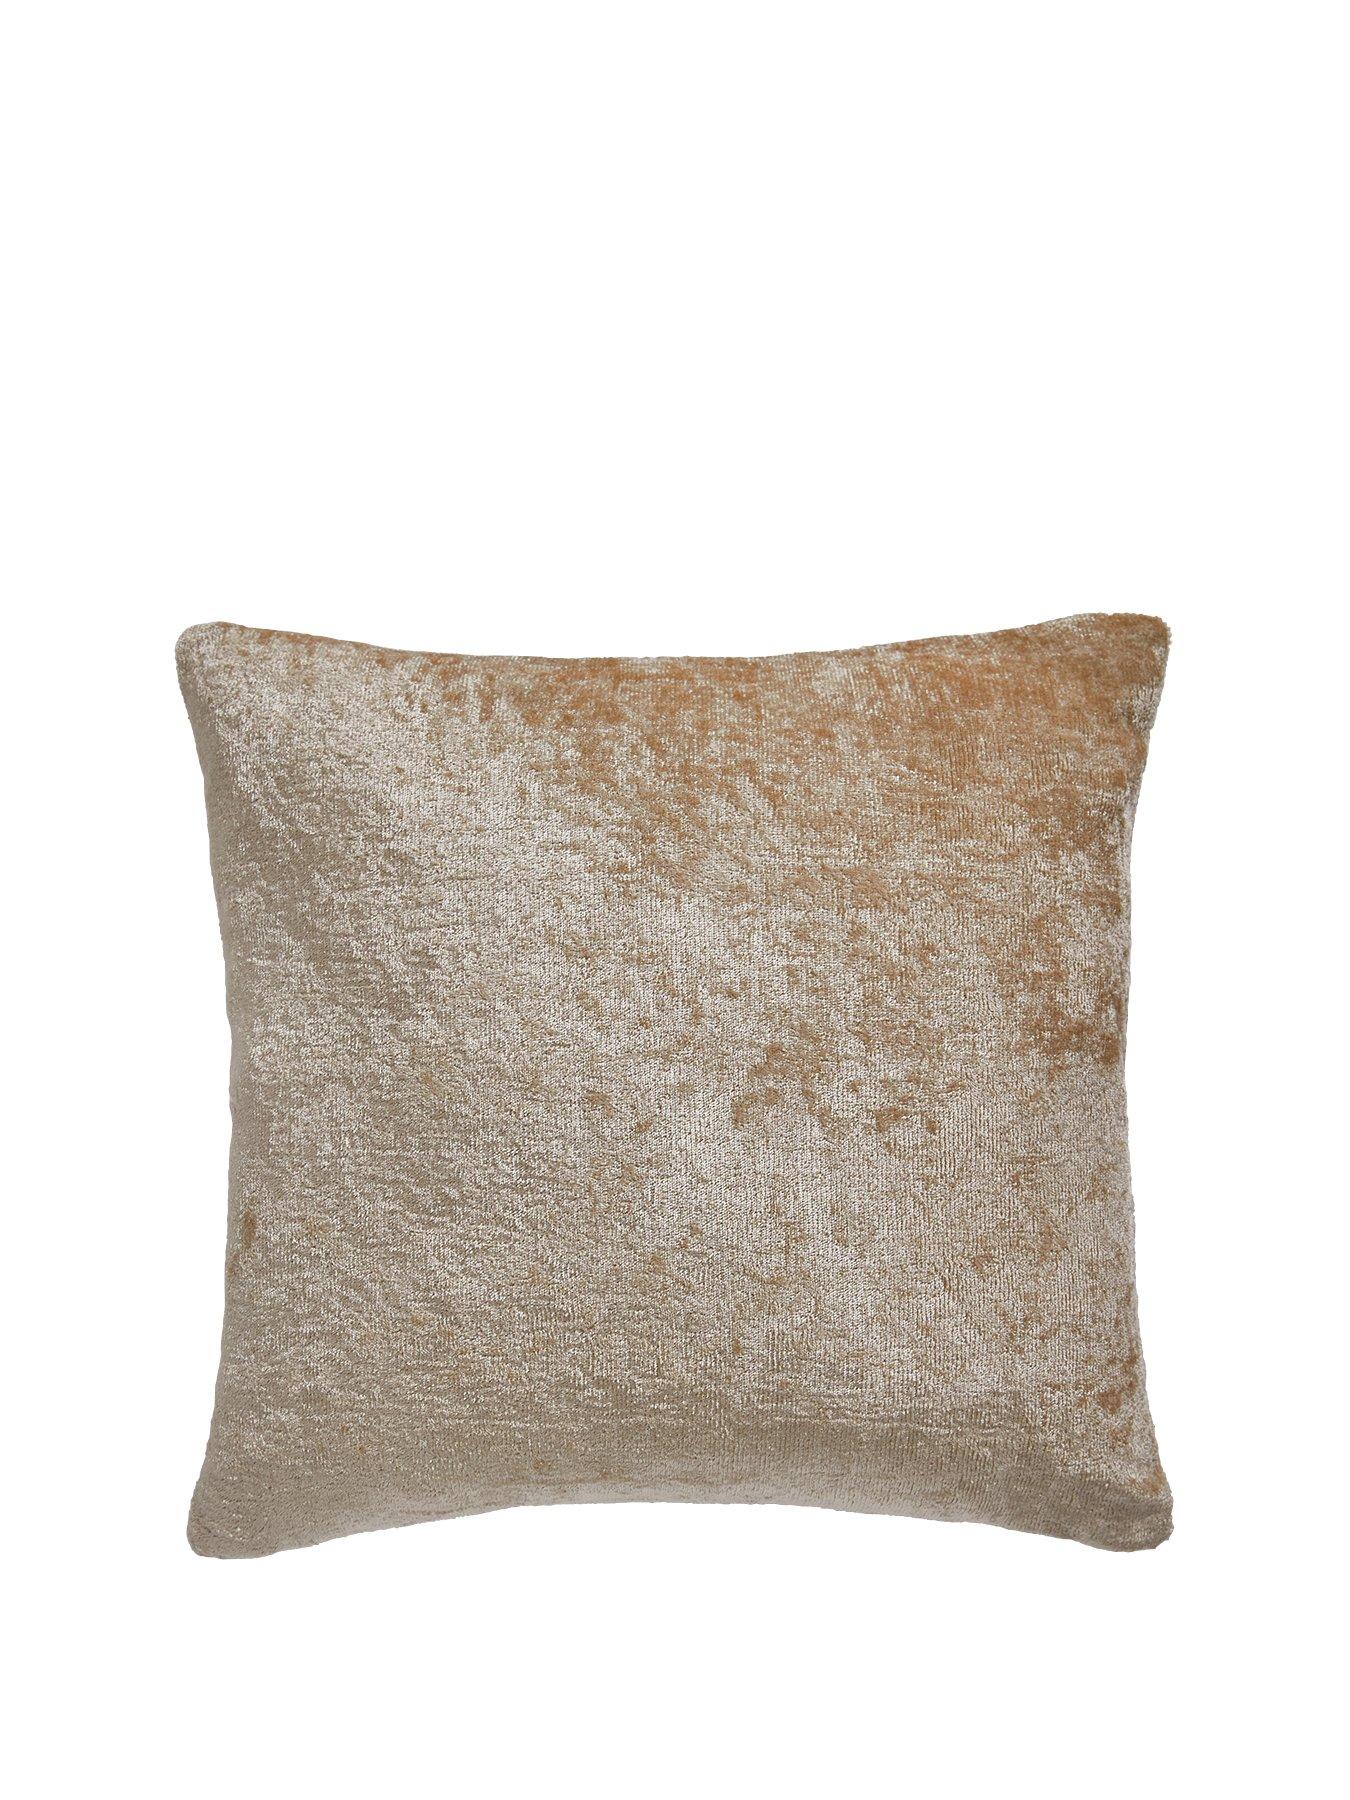 Catherine Lansfield Crushed Velvet Pillowsham Pair, Polyester, Natural :  : Home & Kitchen